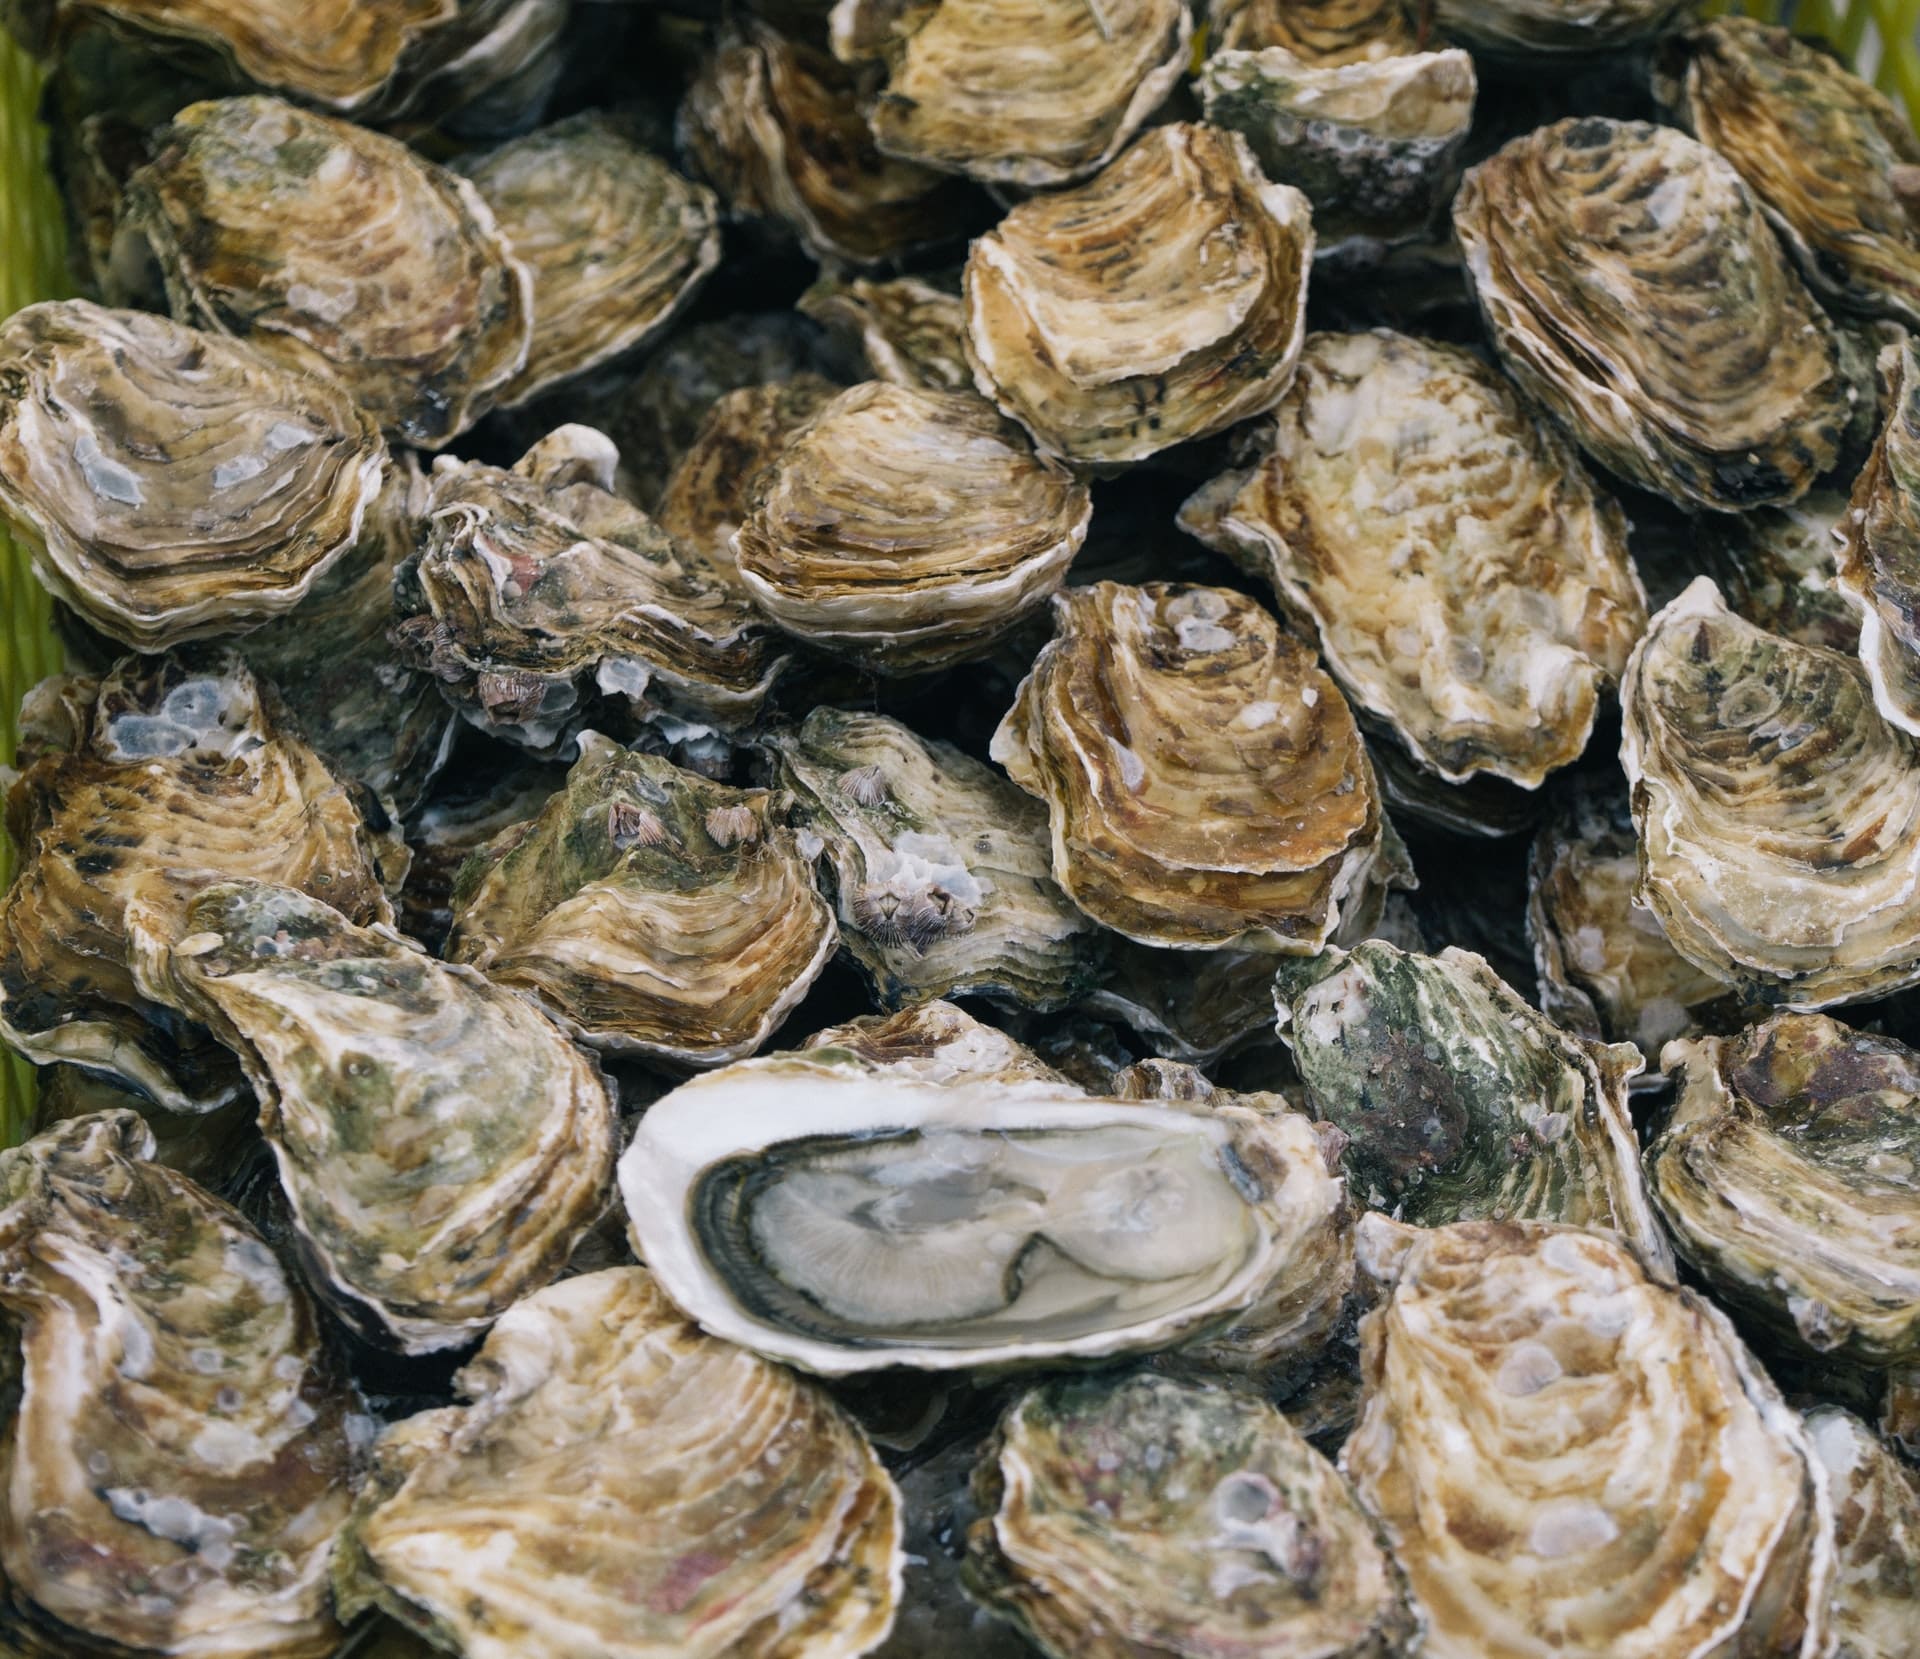 Featured image for “Sewage spill halts shellfish harvesting in Rehoboth Bay”